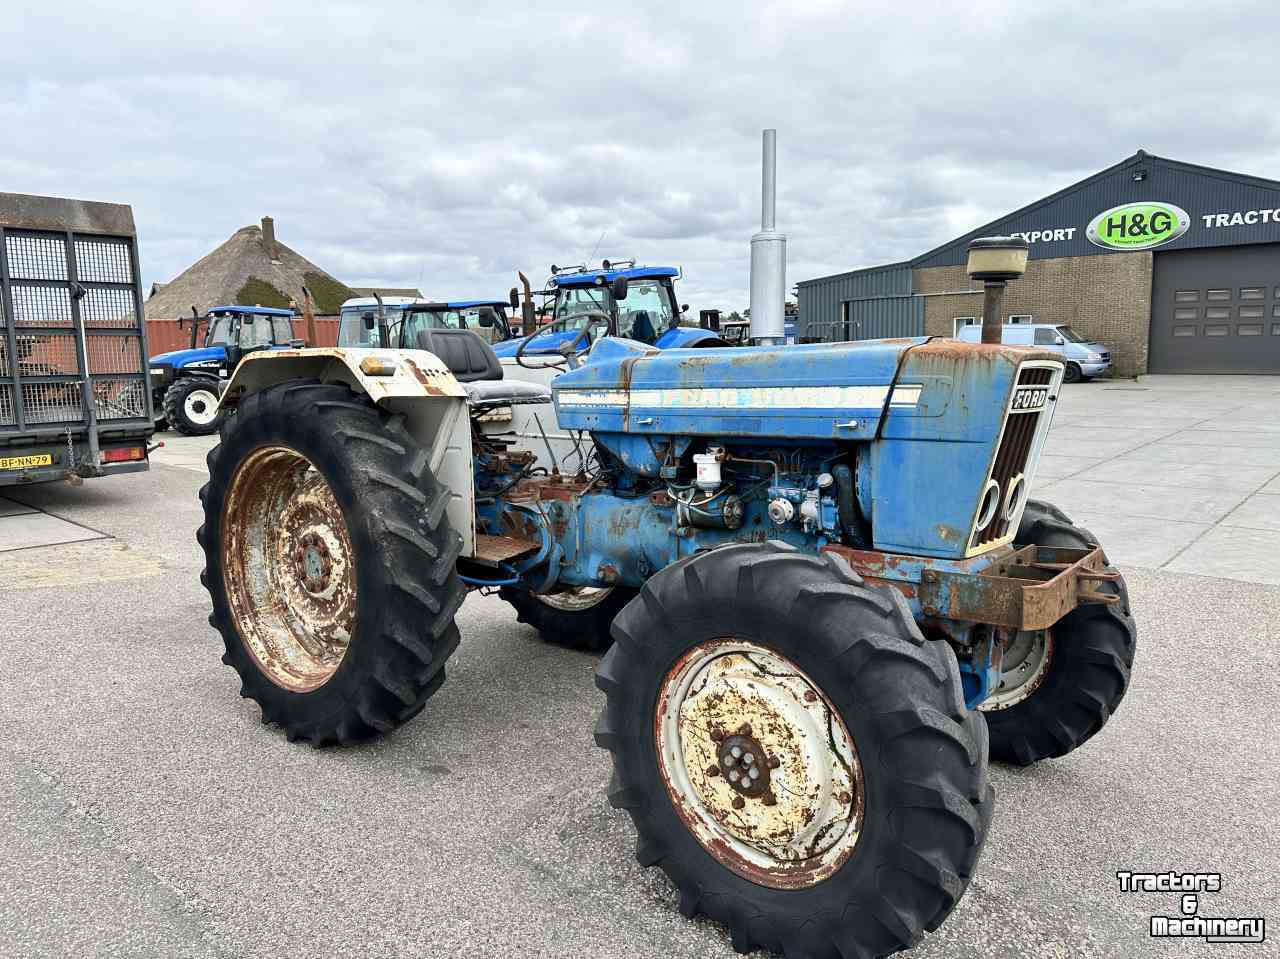 Tractors Ford 5000